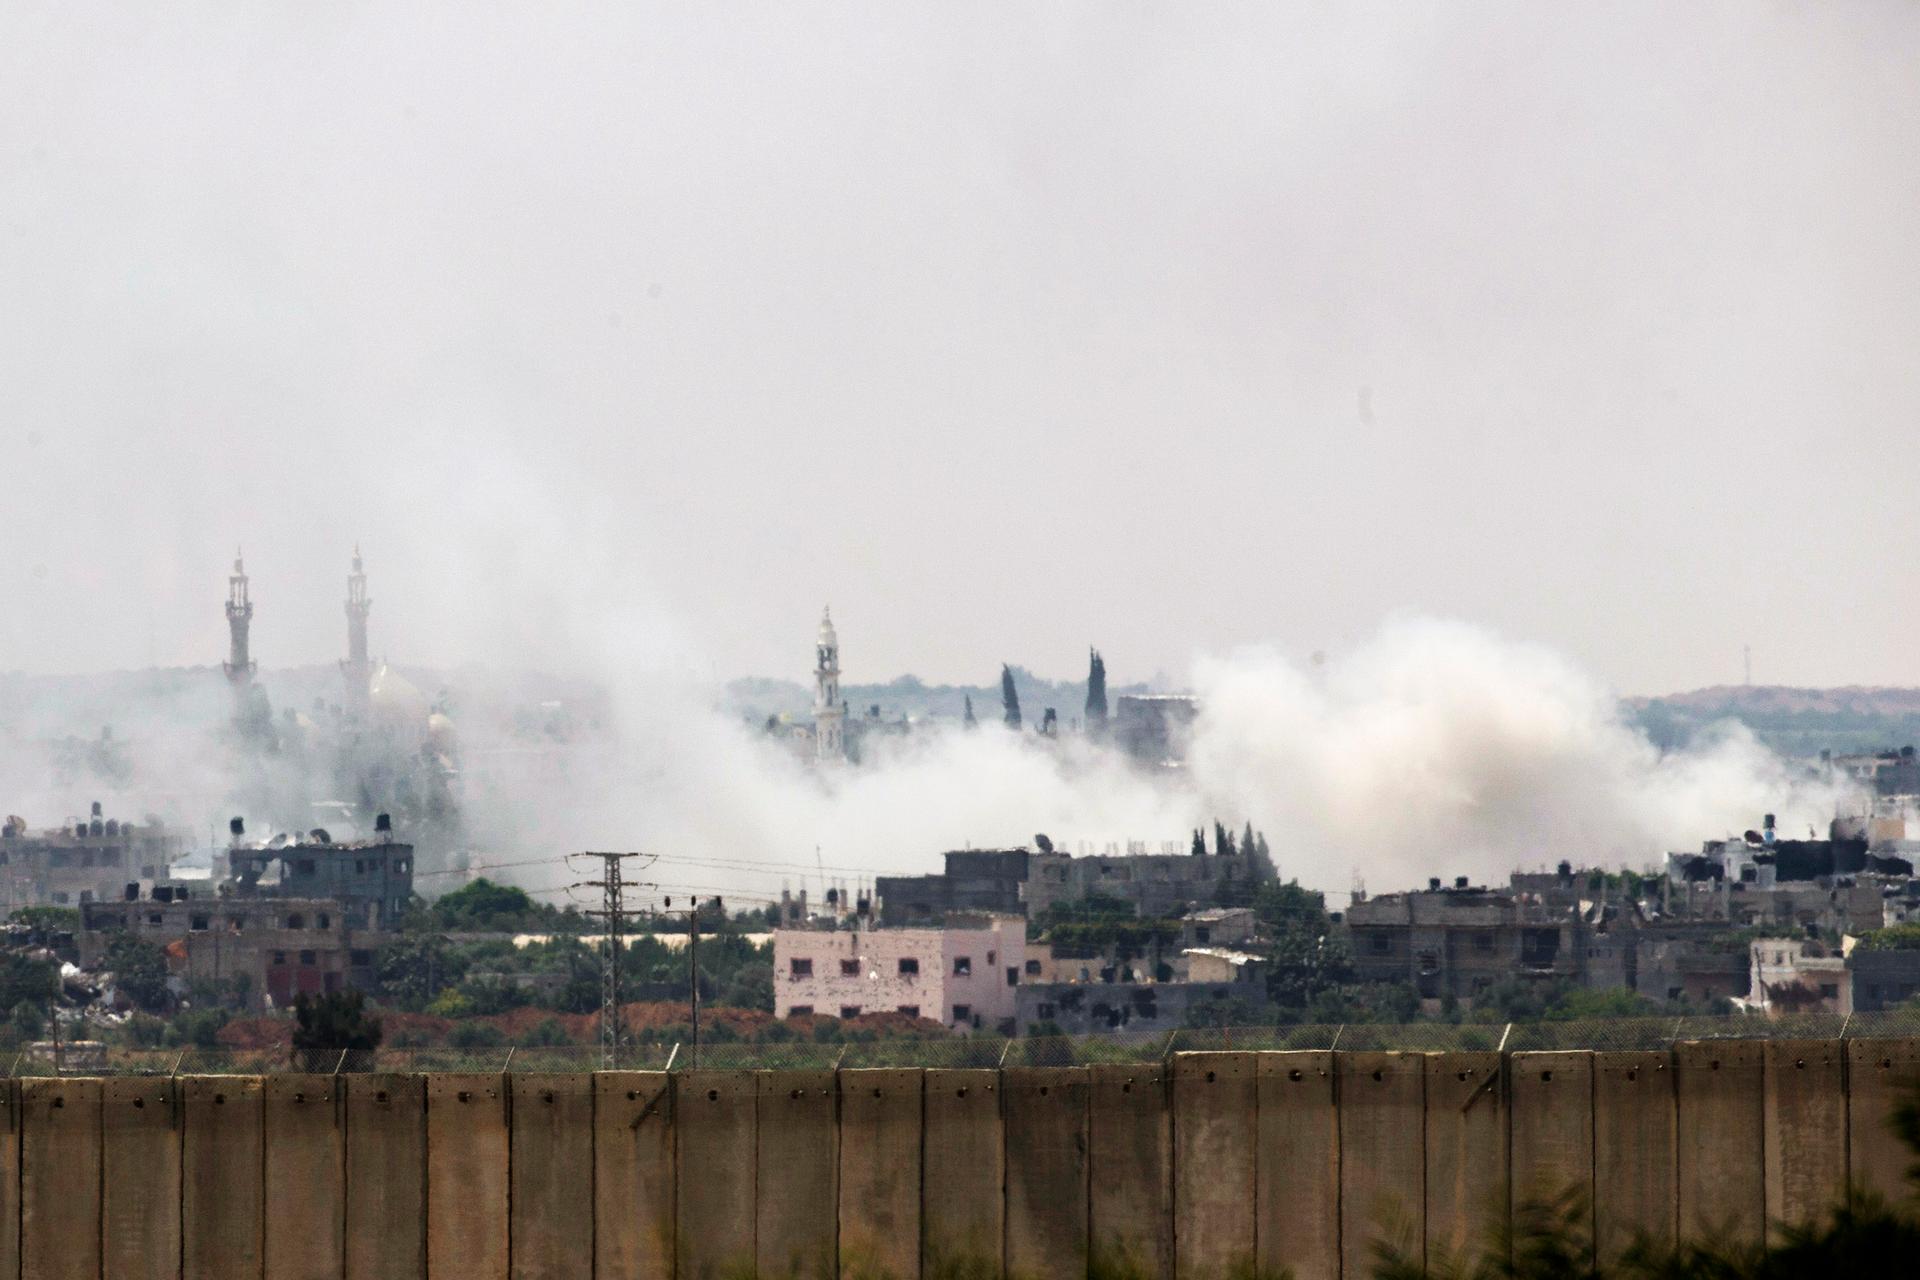 Smoke rises after an Israeli strike over the northern Gaza Strip Tuesday. Military and civilian casualties are mounting as Israeli forces push into urban areas like this.  